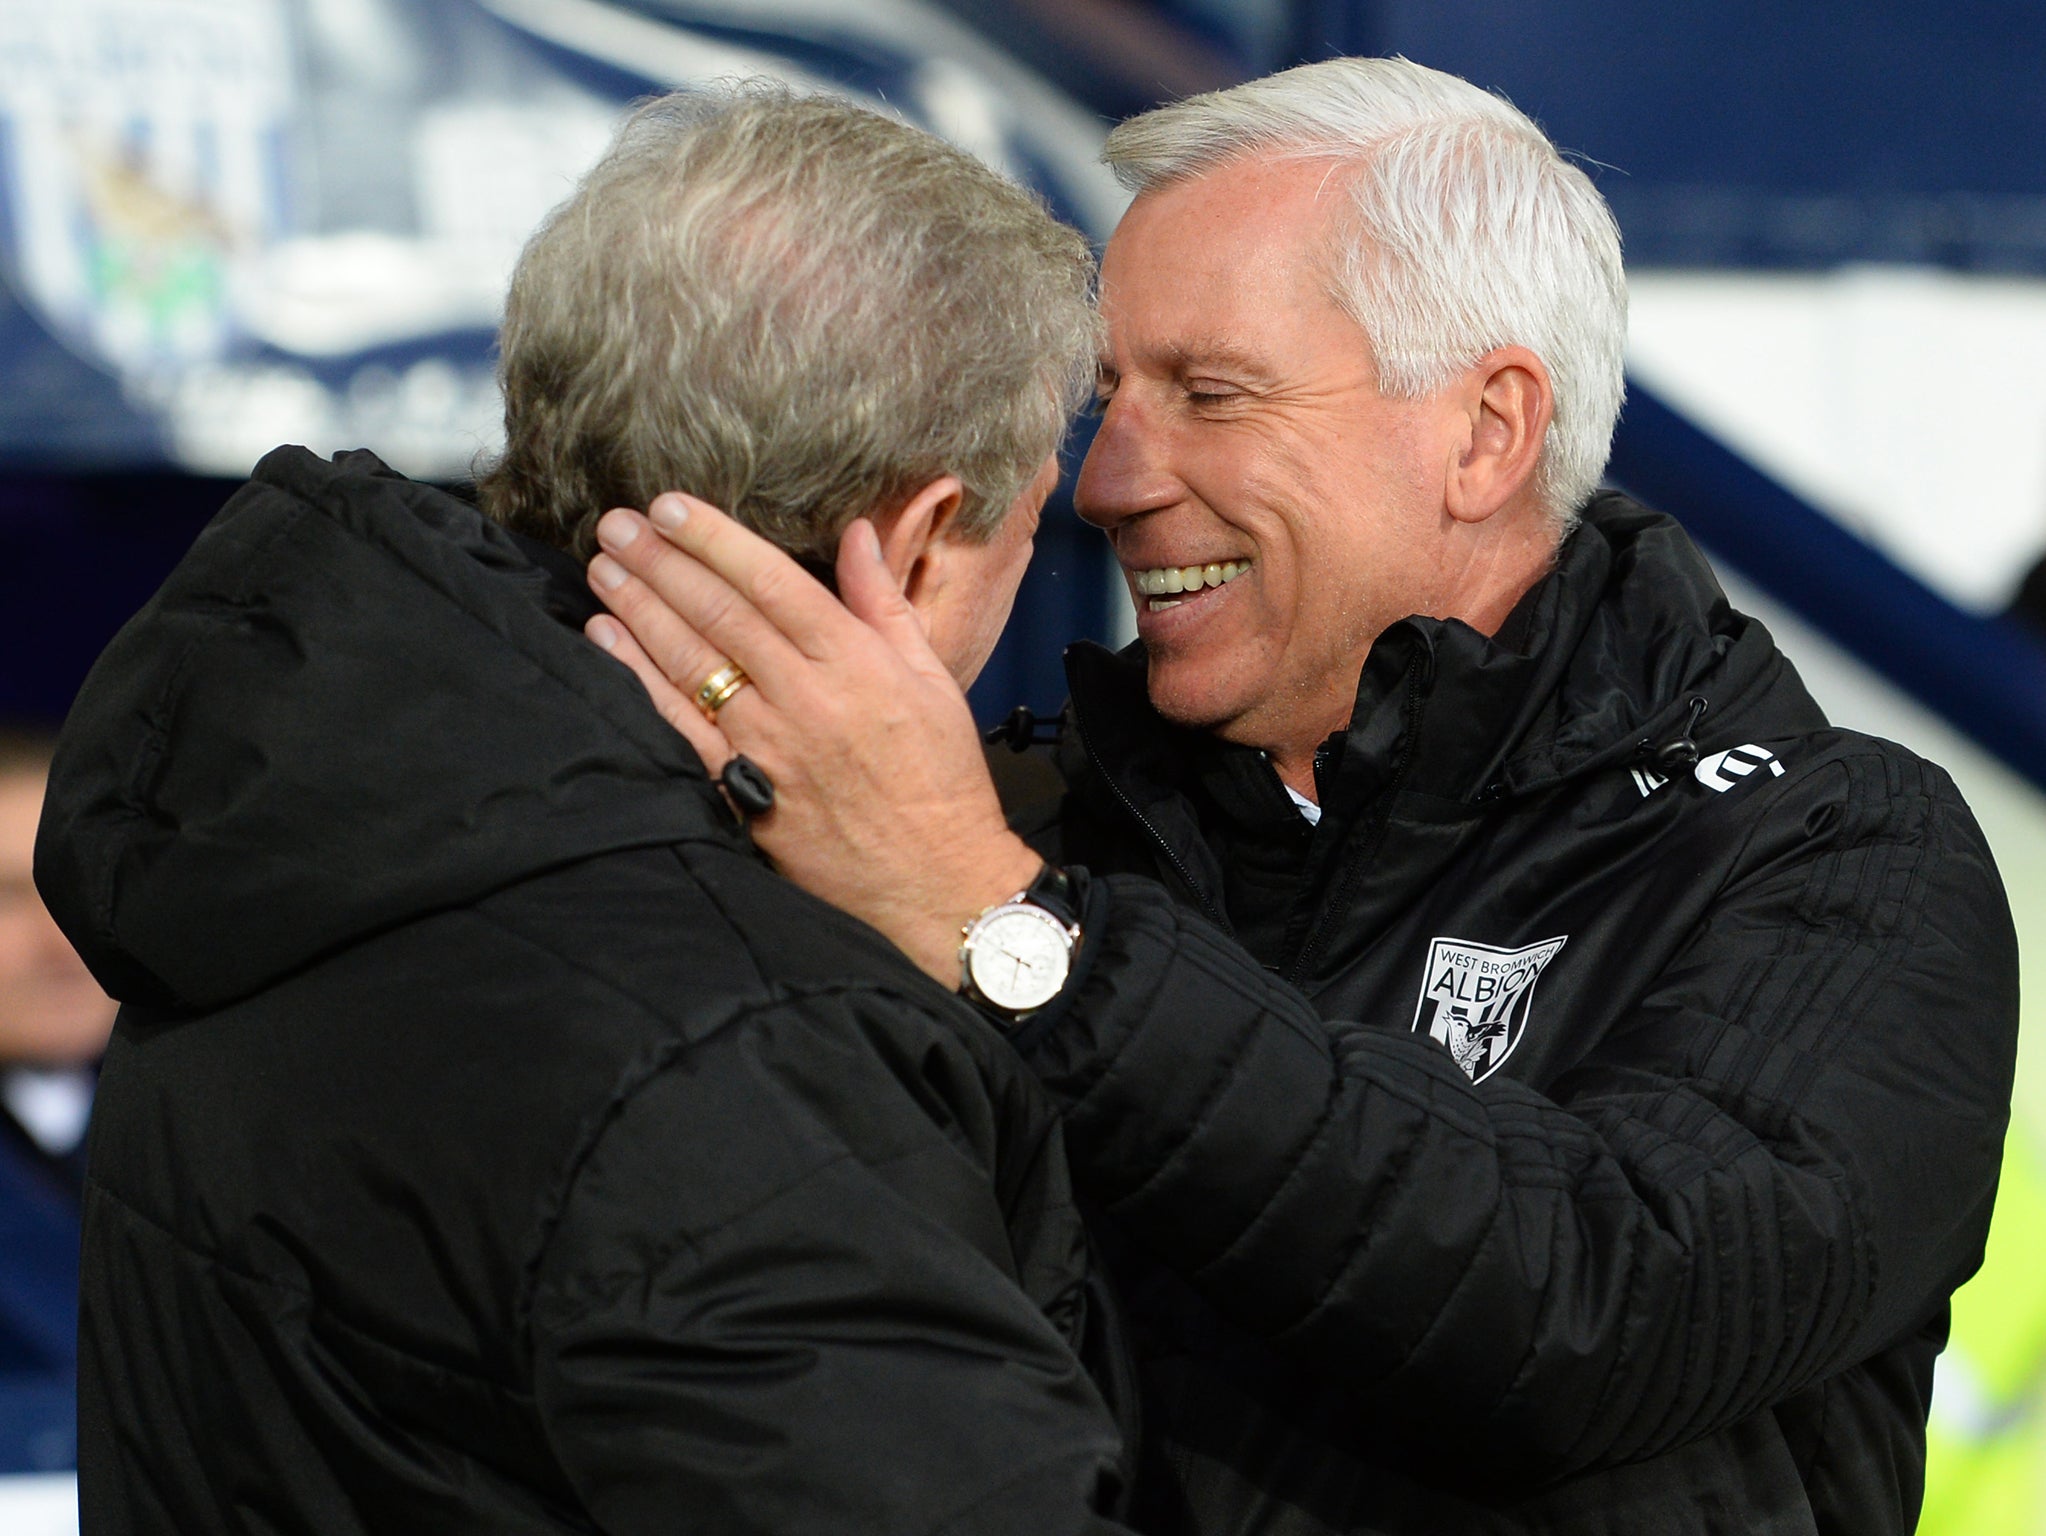 Hodgson and Pardew shake hands before the match